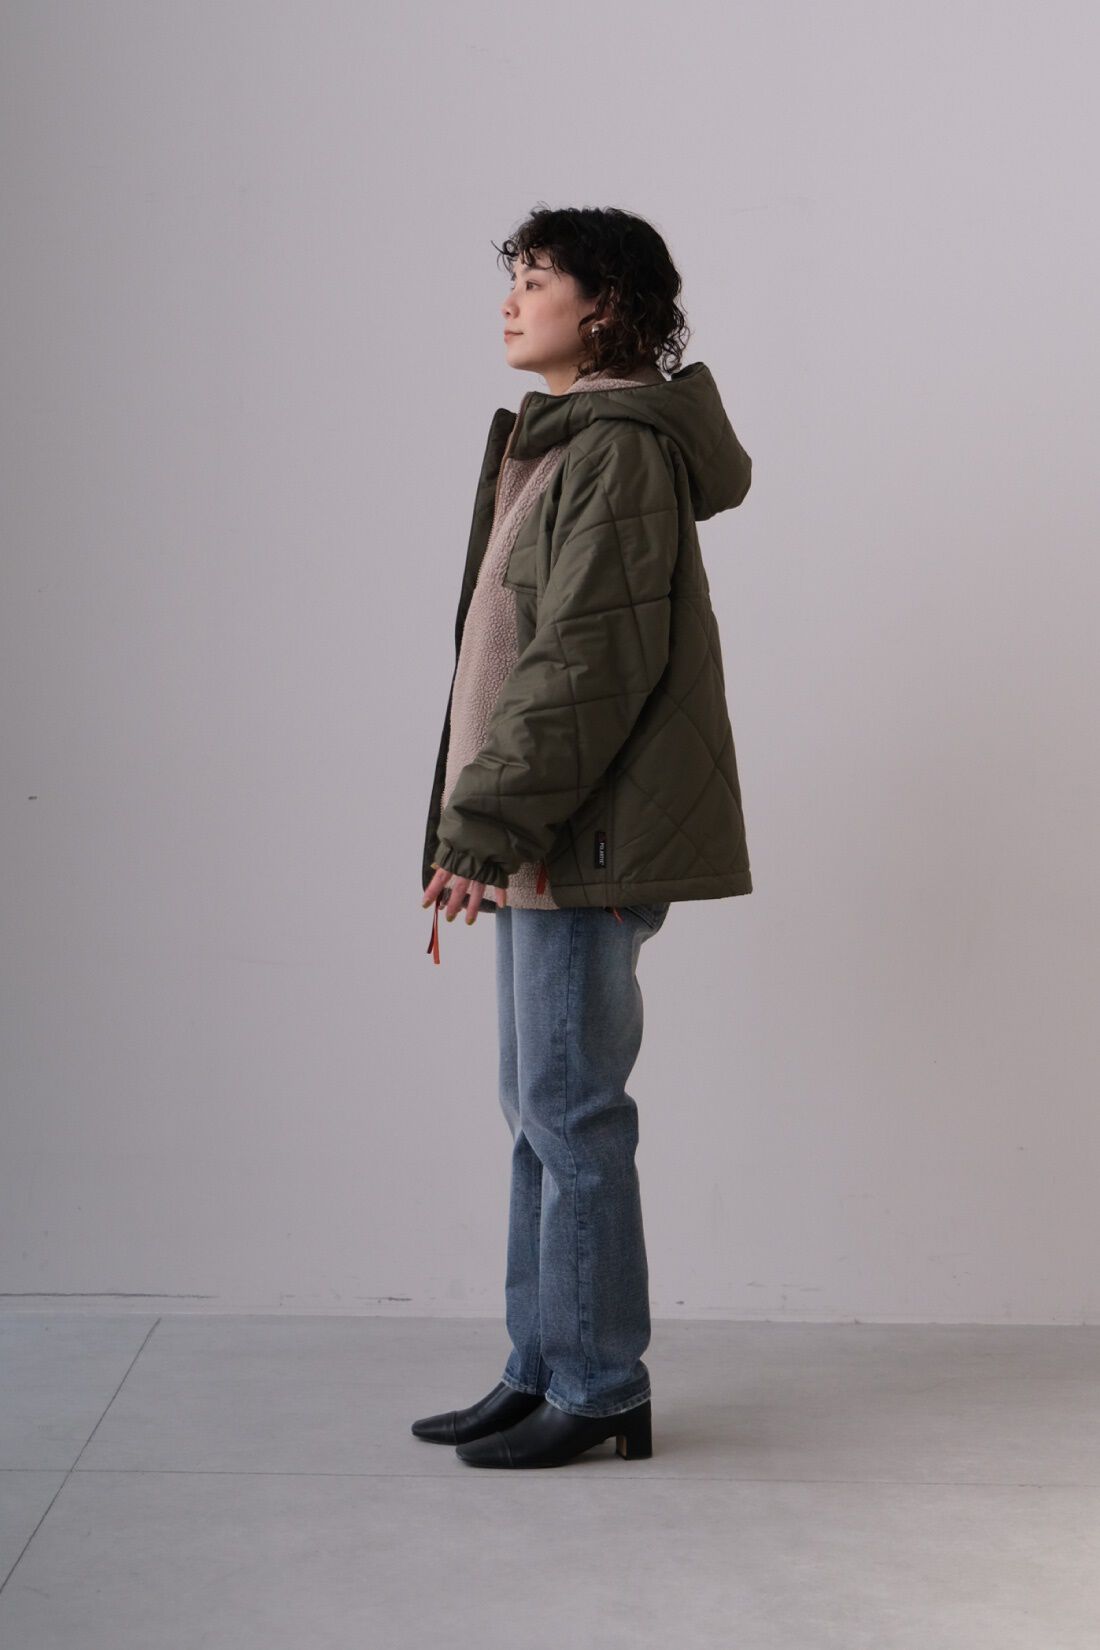 Real Stock|MEDE19F 〈SELECT〉　【GERRY】 VINTAGE FULL ZIP QUILTING BOA JACKET